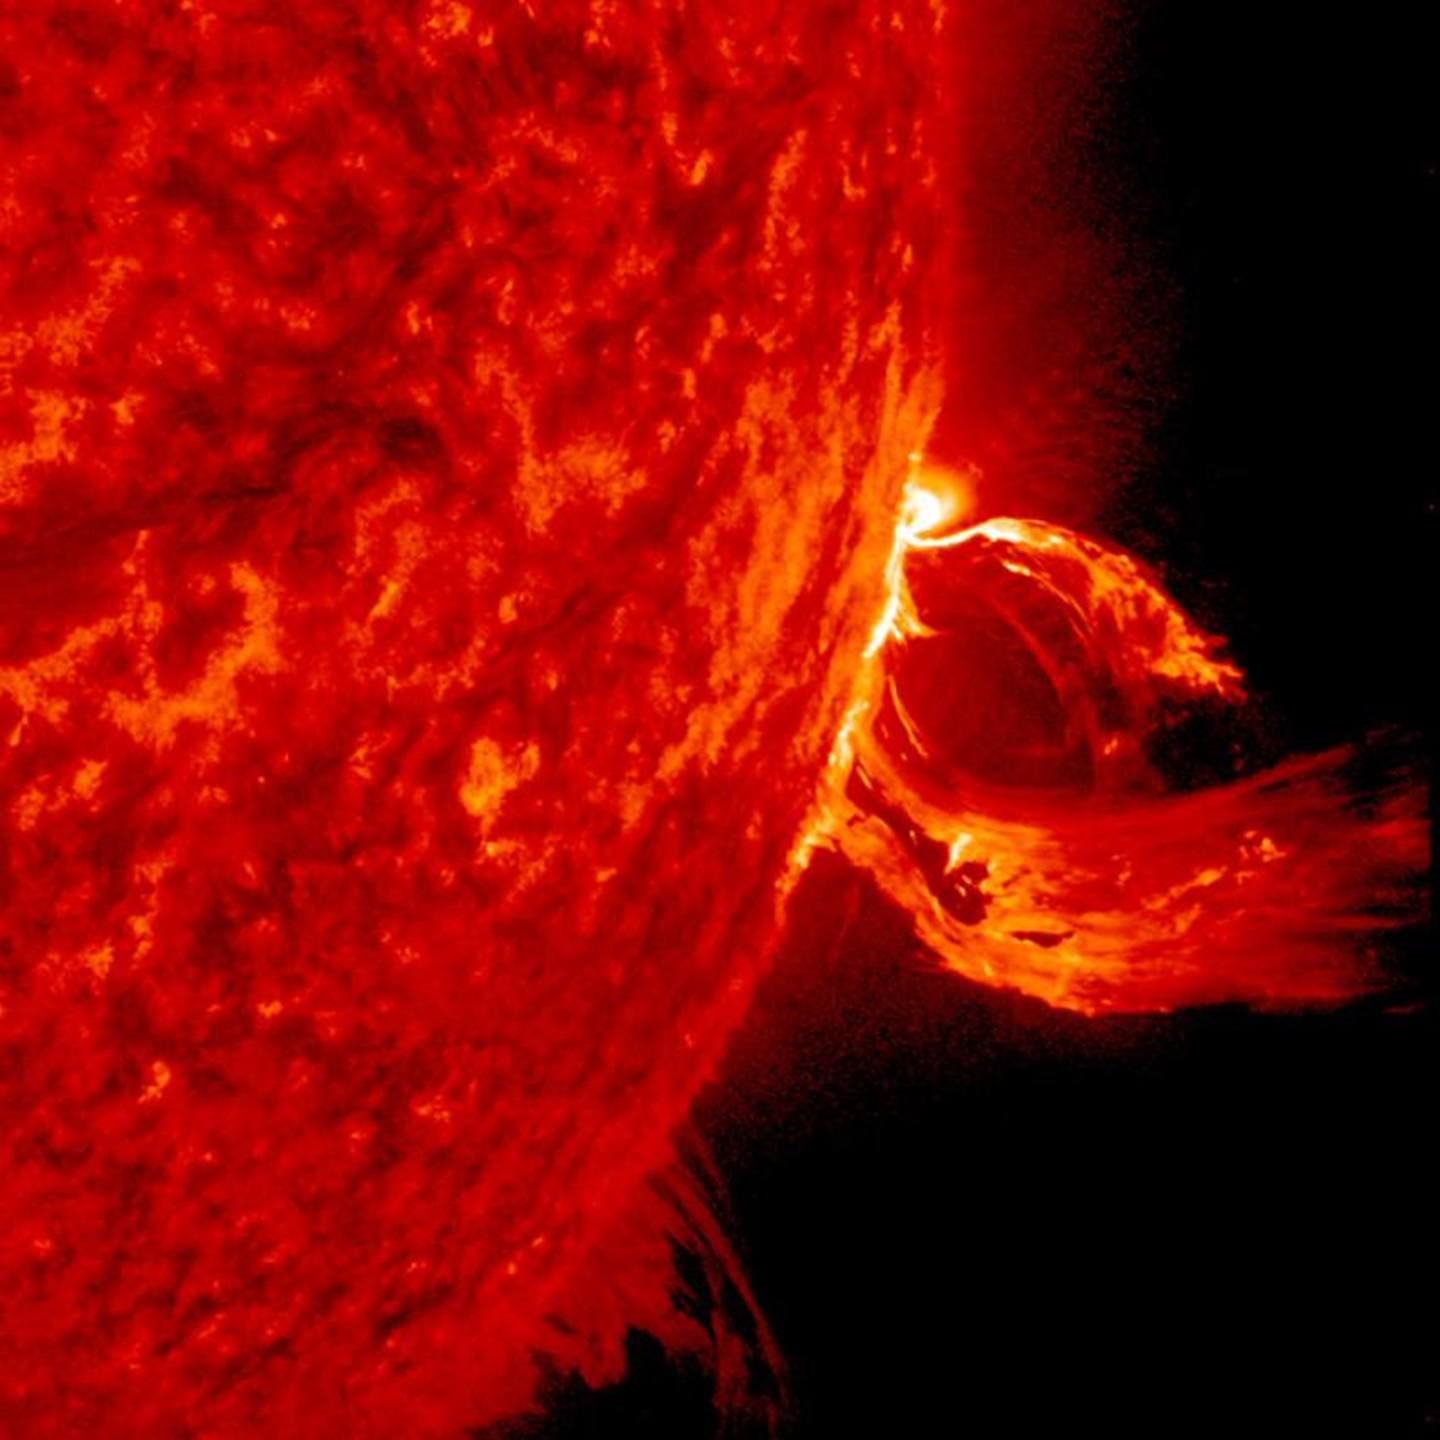 A coronal mass ejection is seen erupting from the Sun in 2015. Credit: NASA Goddard Flight Center.